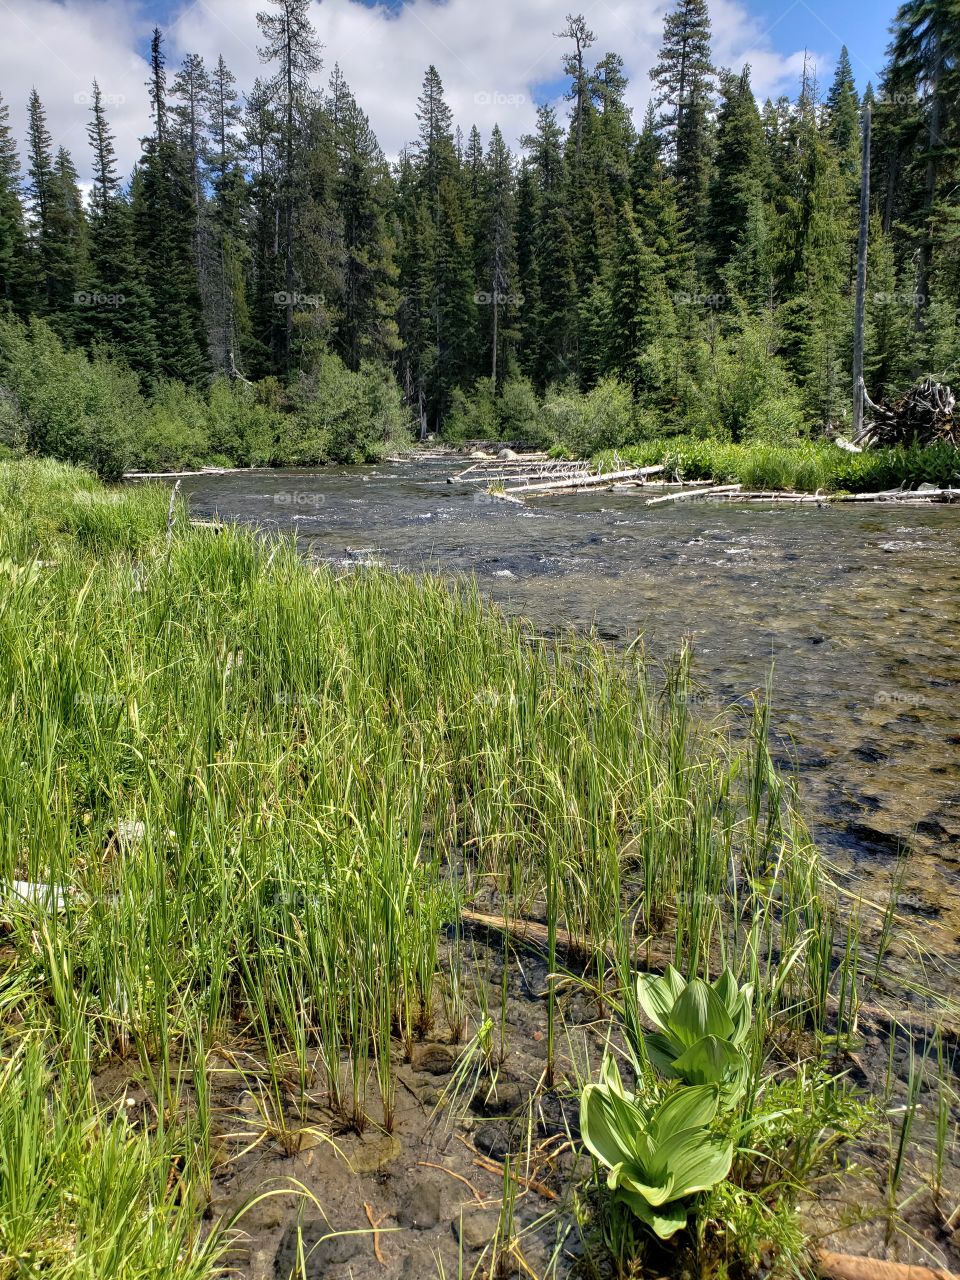 Thick wild grasses and weathered logs along the lush green banks of the Deschutes River running through the forests of Central Oregon on a sunny summer day.